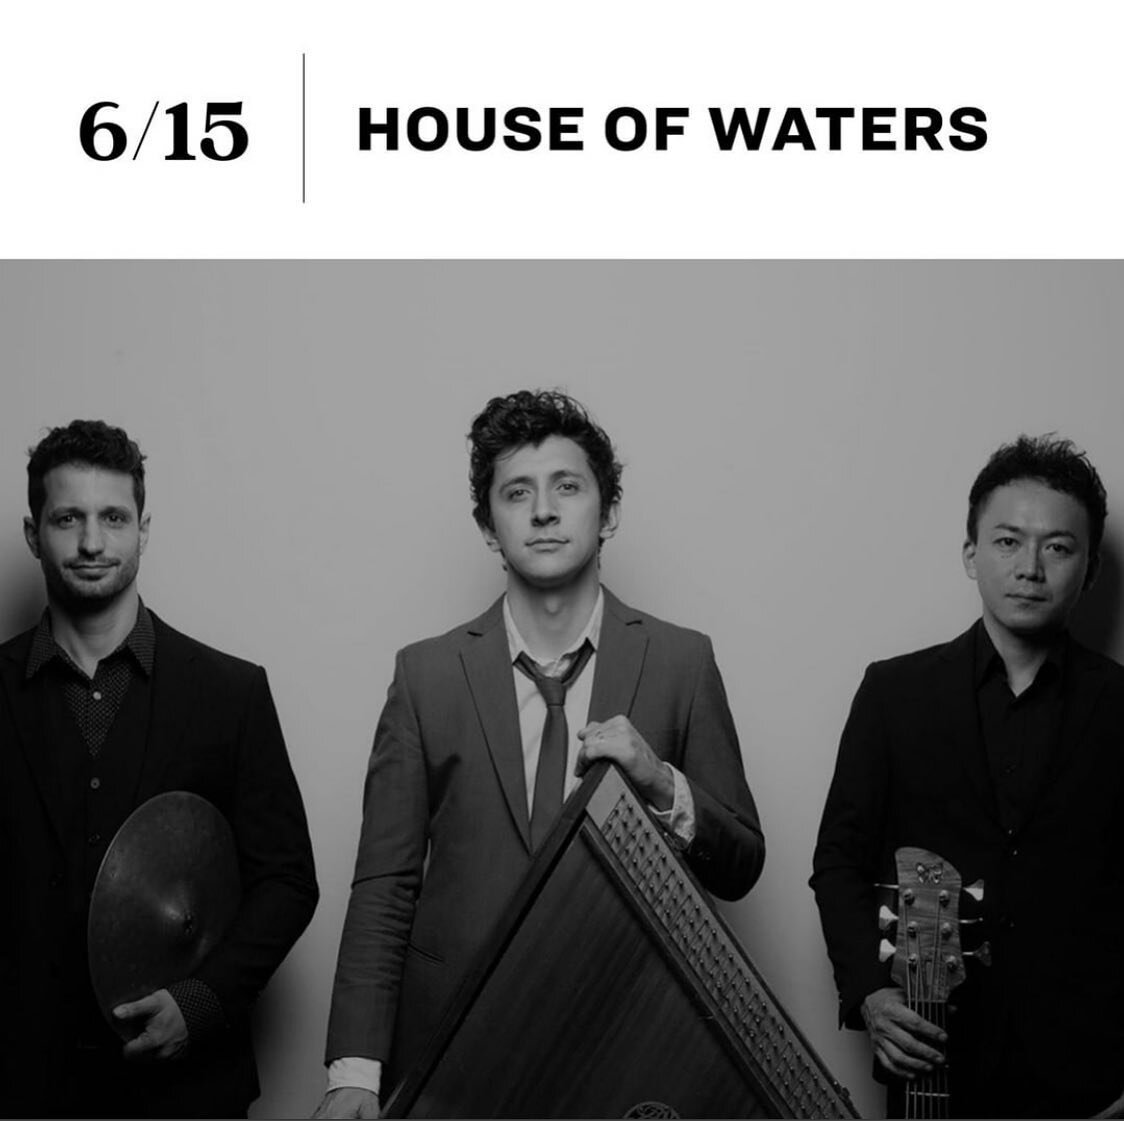 WEDNESDAY!

I&rsquo;m back at Listening Room with Normal Mode opening for House of Waters!

They are a stellar trio of musicians that just released their new album on Ground Up Music (Snarky Puppy&rsquo;s label)! We&rsquo;re looking forward to a grea